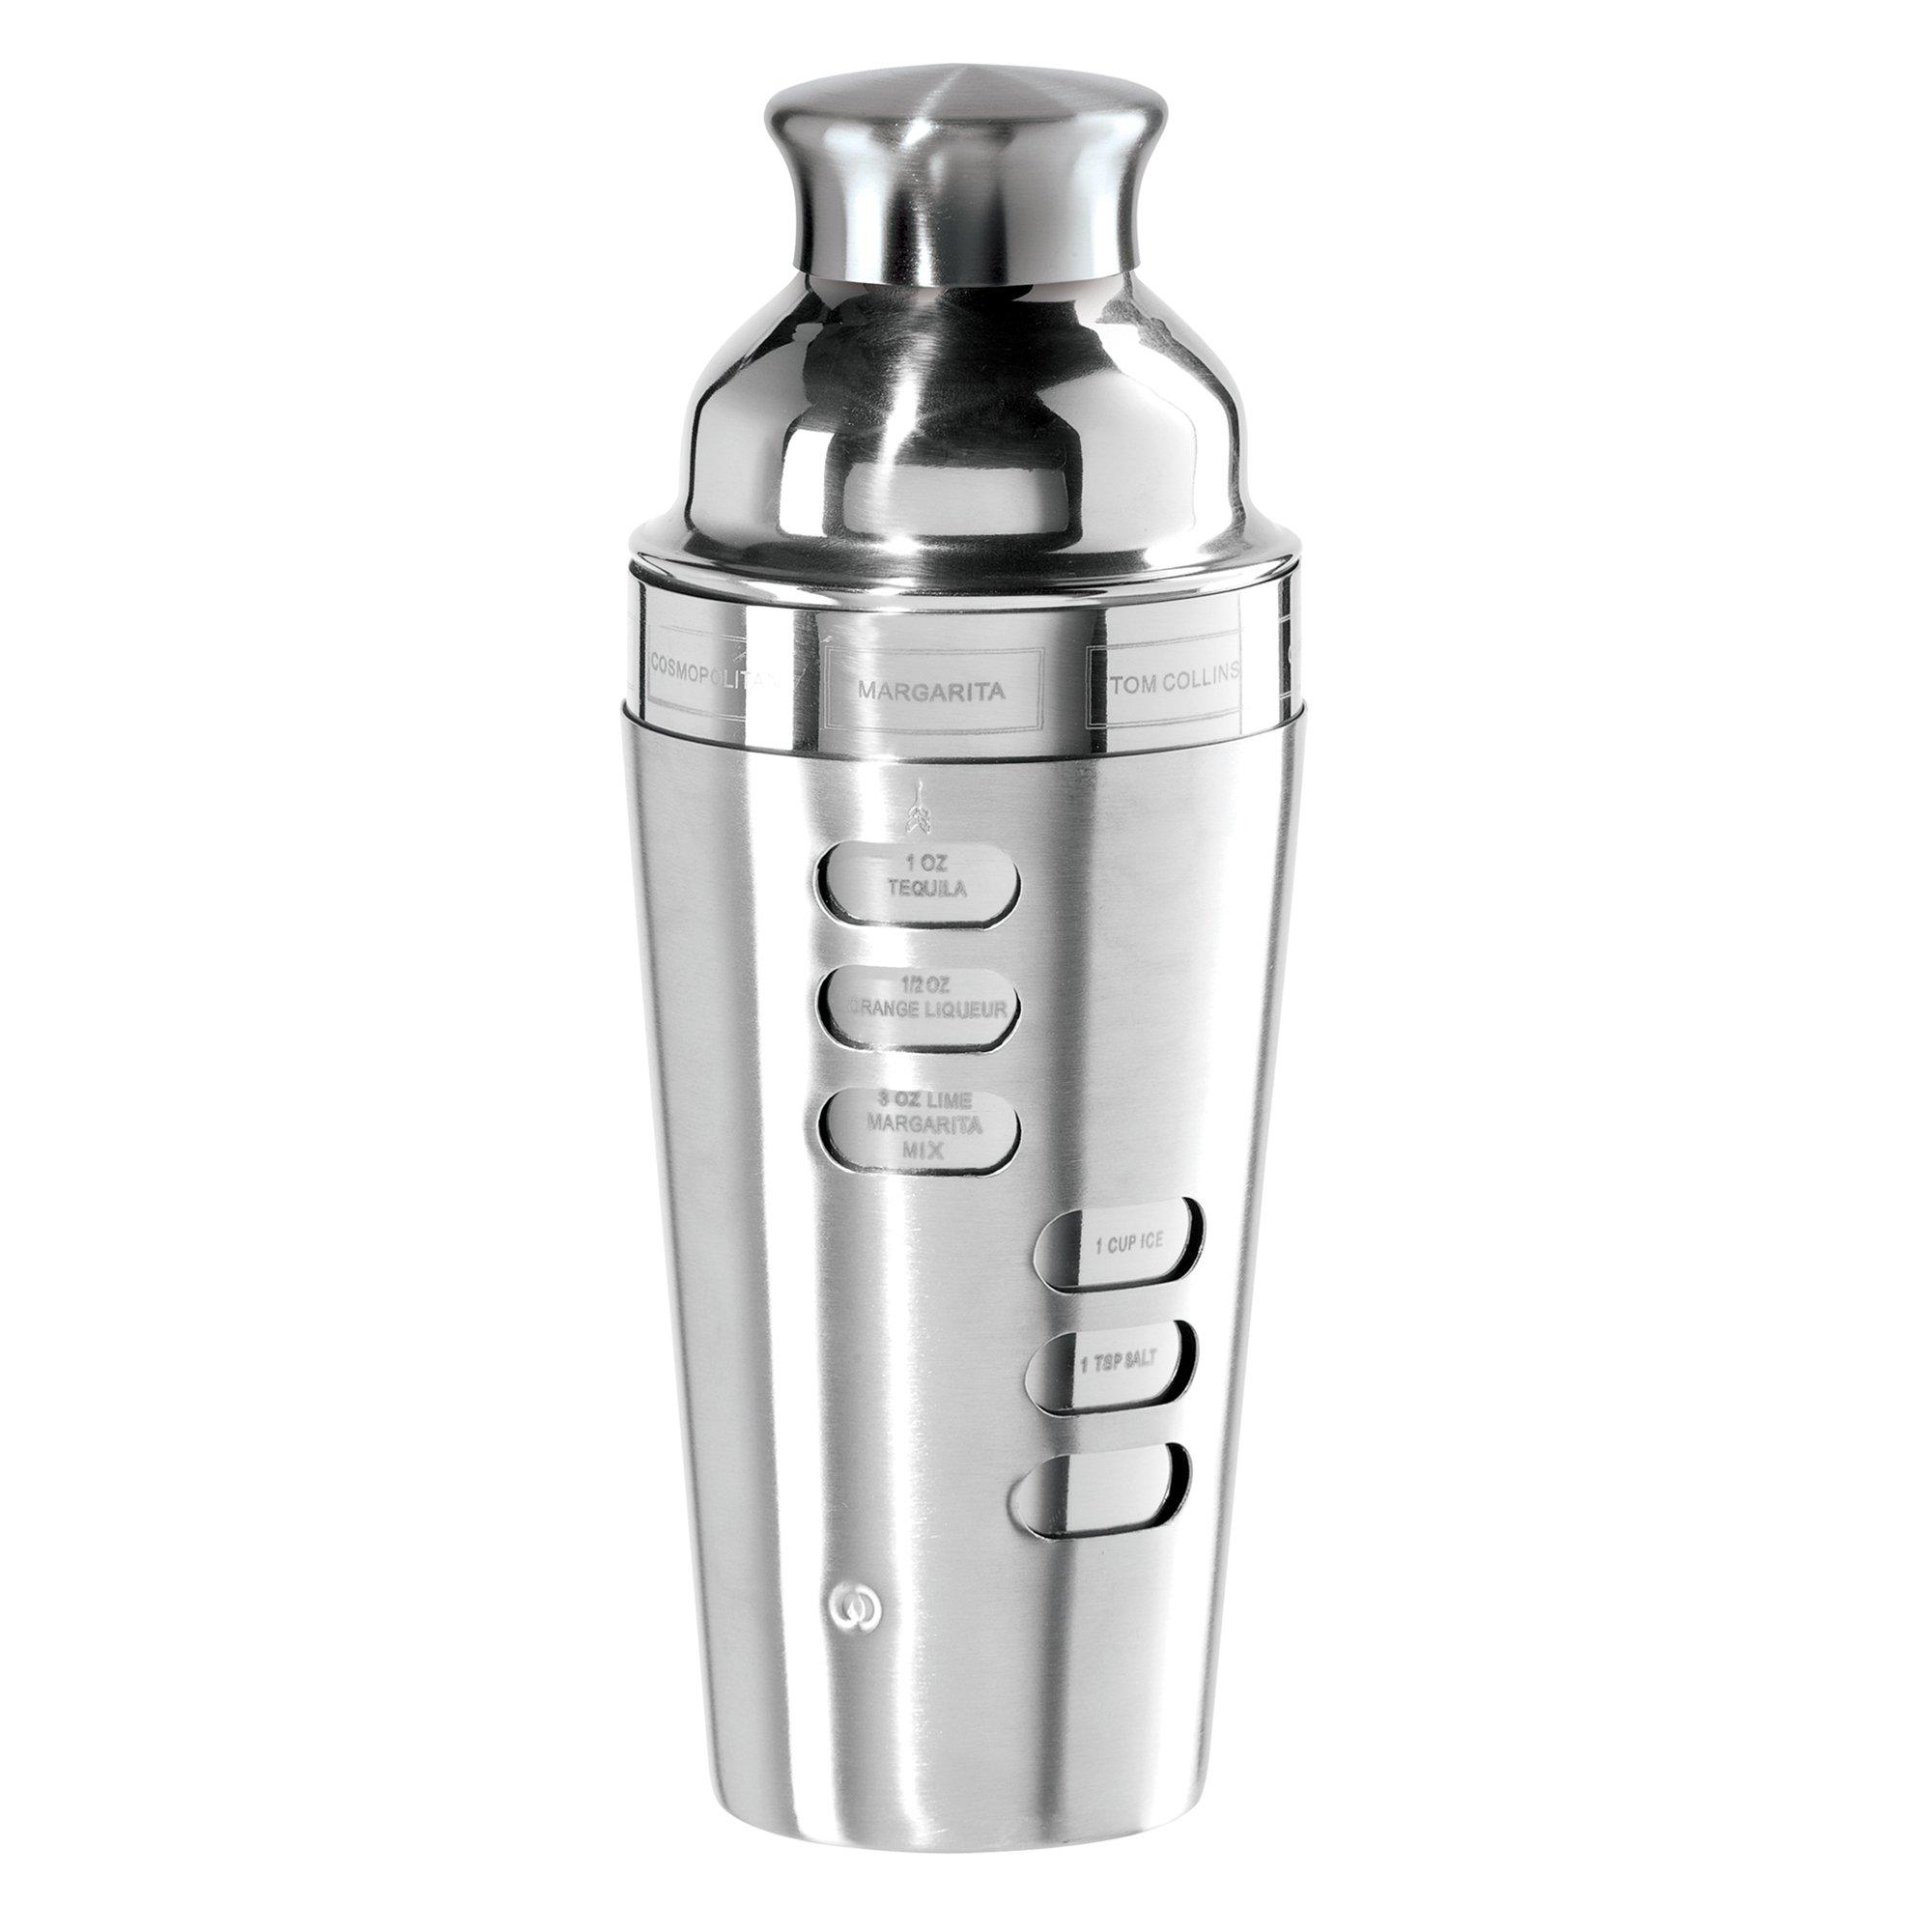 https://images.beallsflorida.com/i/beallsflorida/656-0592-0385-07-yyy/*Oggi-23-Oz.-Stainless-Steel-Dial-a-Drink-Cocktail-Shaker*?$product$&fmt=auto&qlt=default